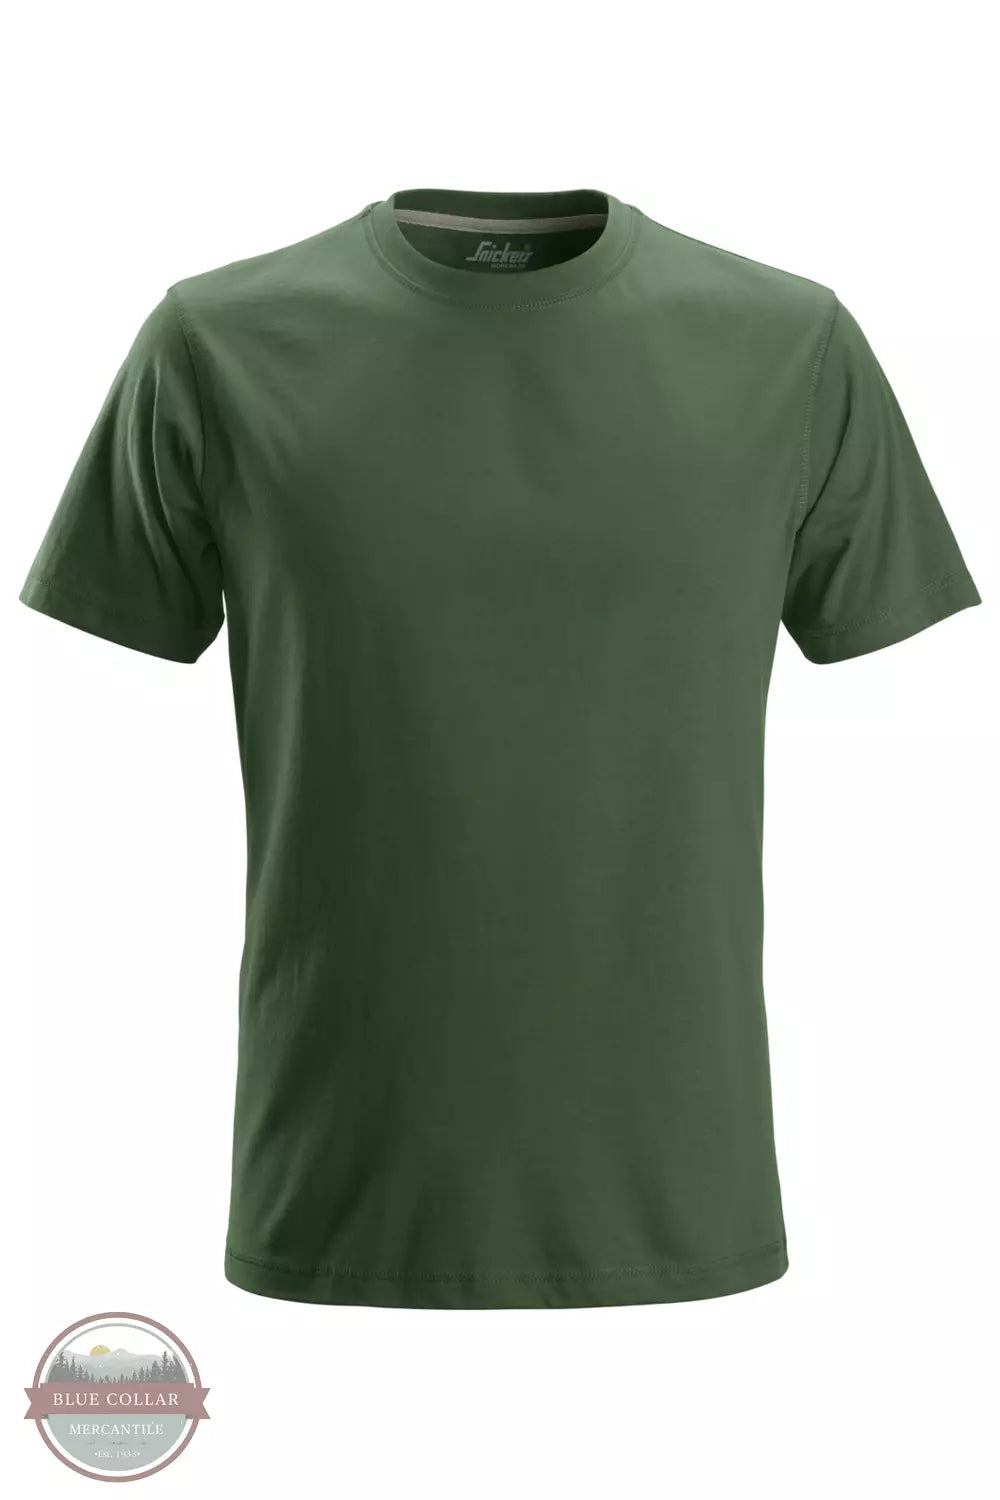 Snicker's Workwear 1361310 Classic Short Sleeve T-Shirt Army Green Front View